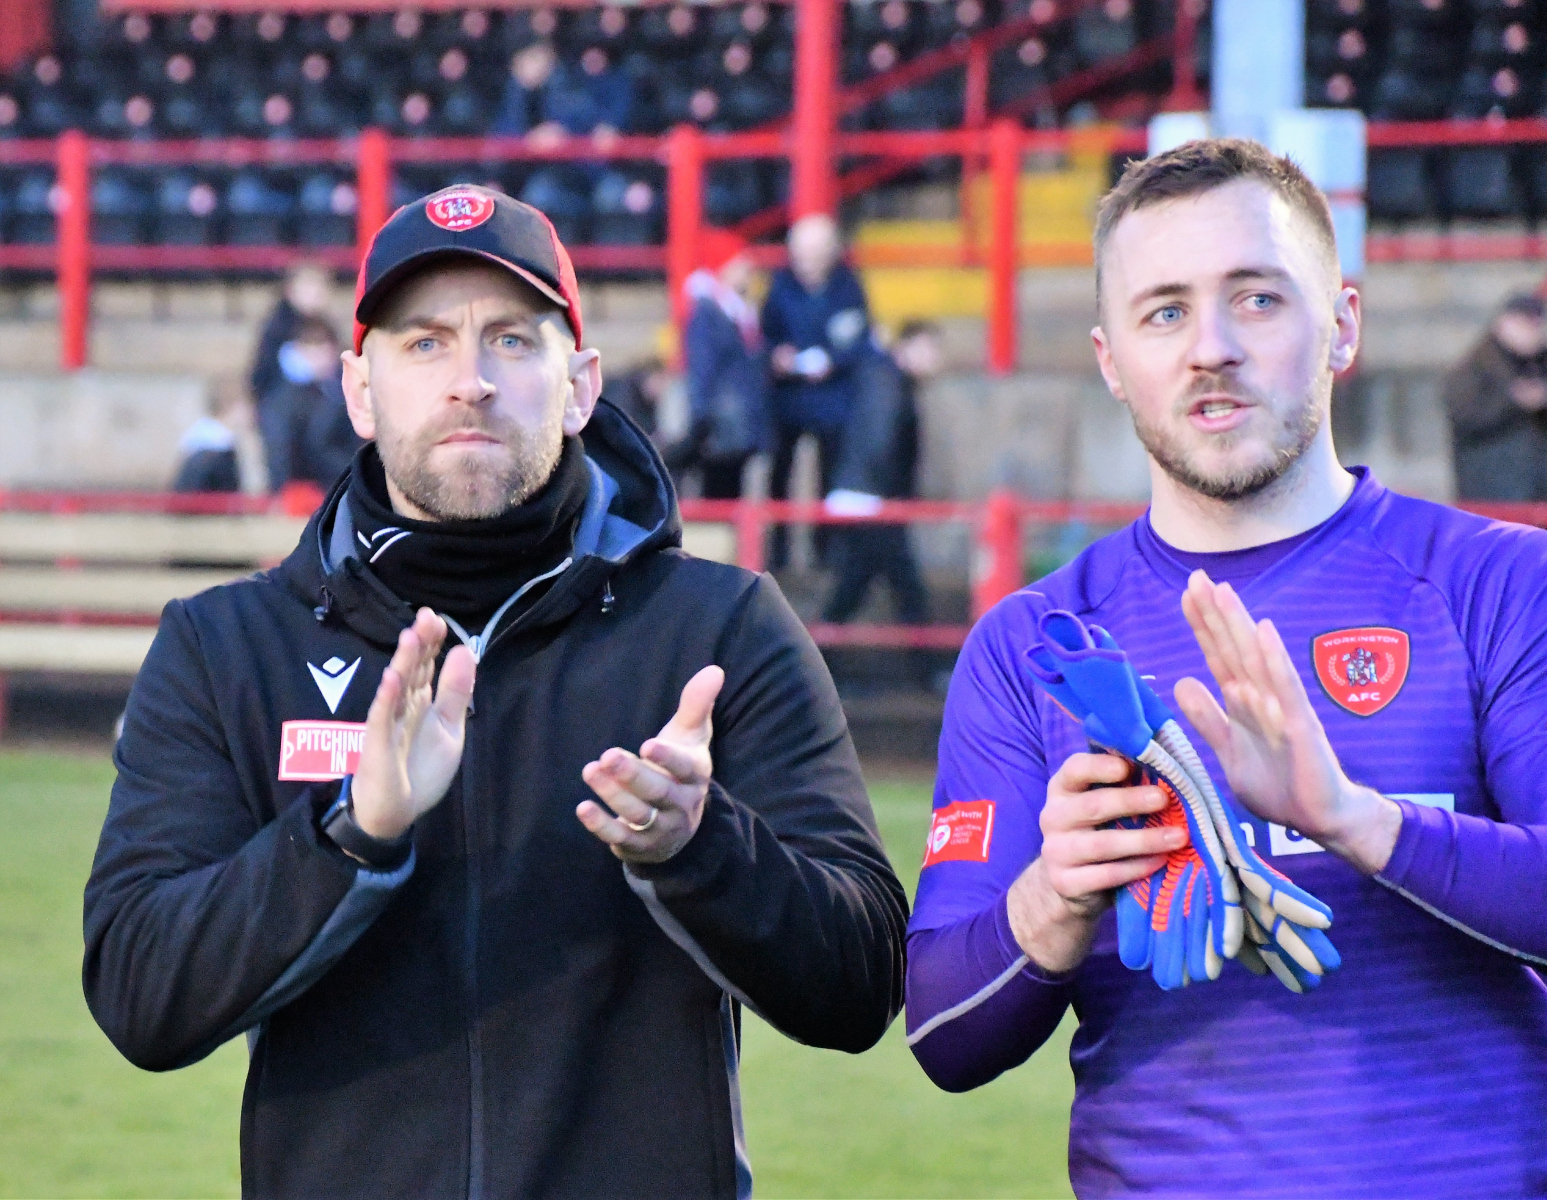 Danny-Grainger-and-Jim-Atkinson-thank-the-Reds-fans-at-the-end-of-the-game-Ben-Challis